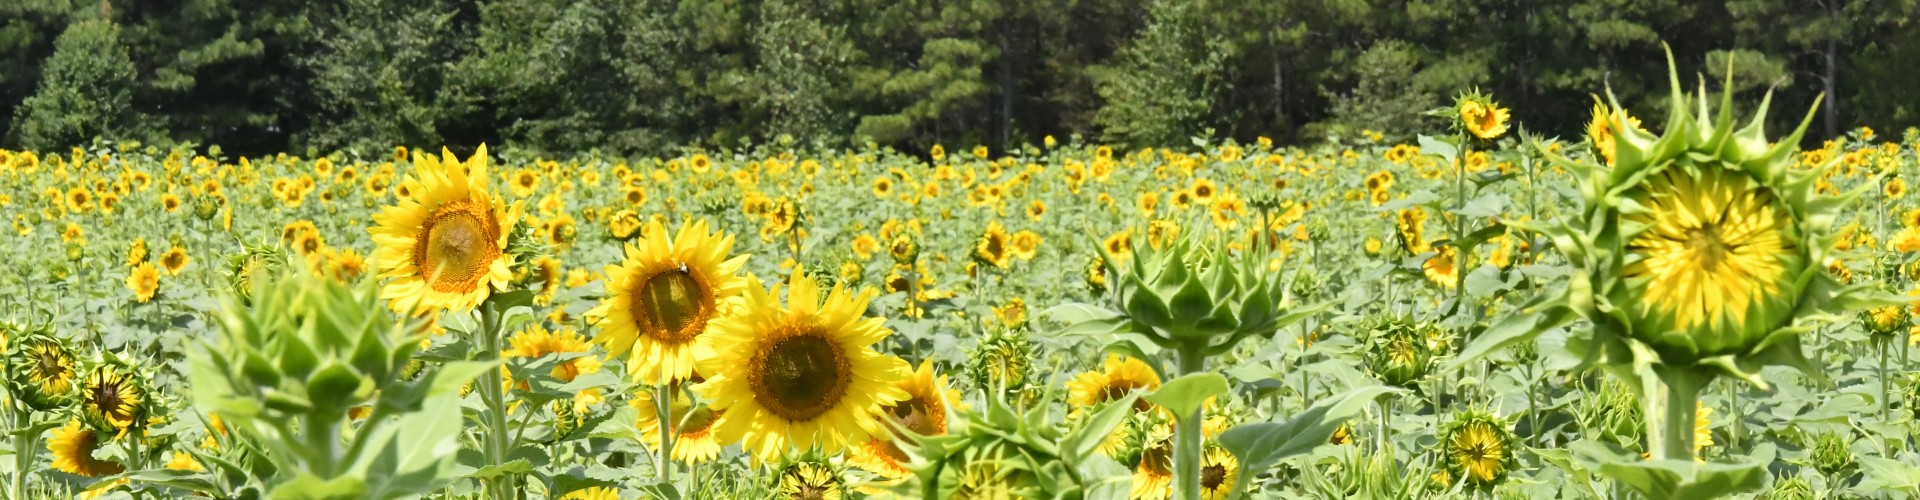 Field of sunflowers at Dix Park